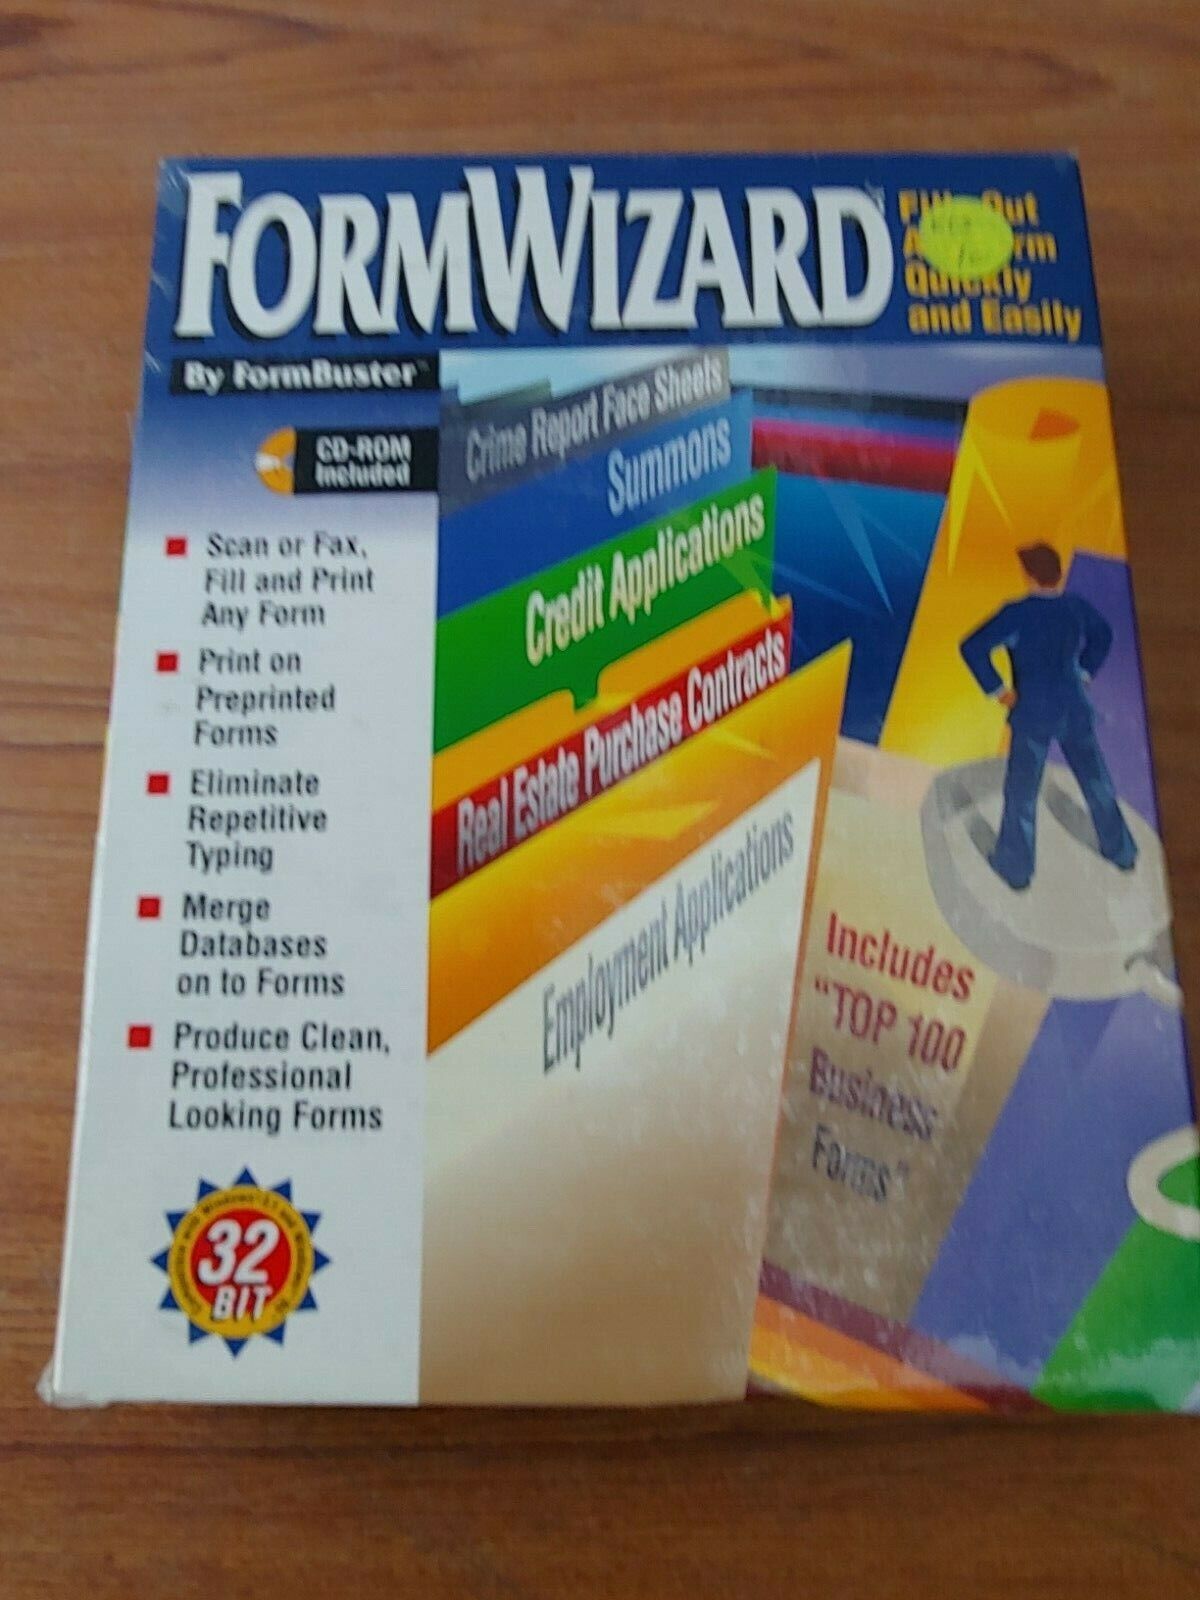 Rare New Old Stock - FORMWIZARD by FormBuster 32 Bit Windows CD-Rom Software